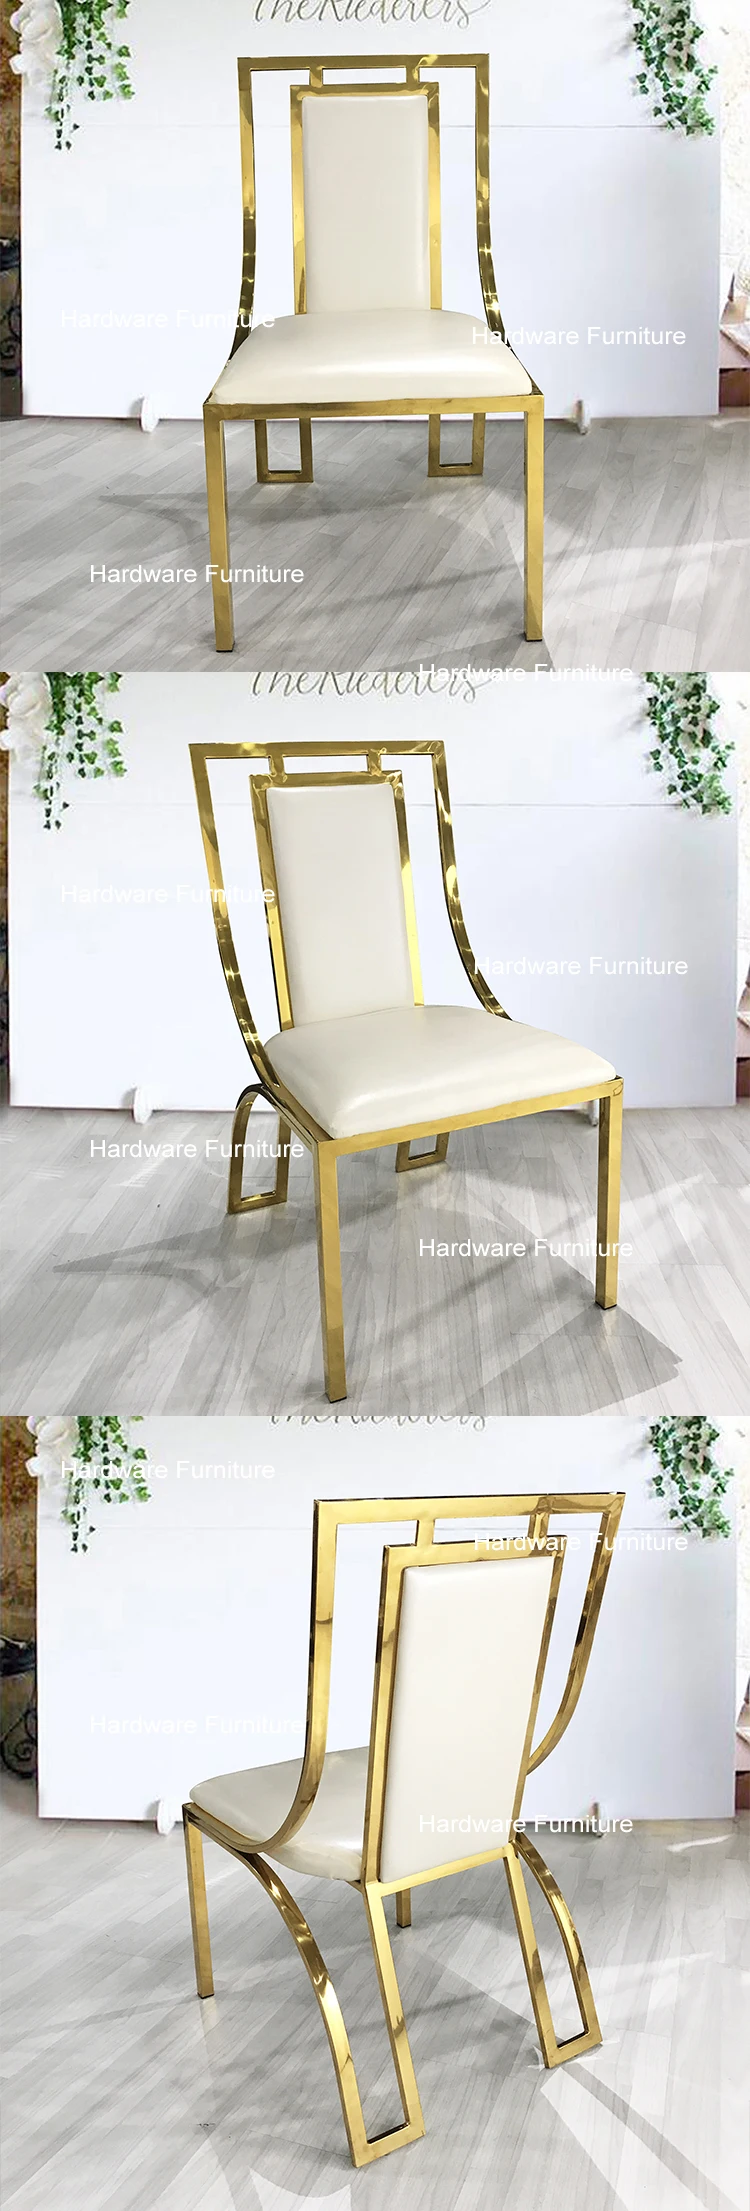 cheap prices turkey style wedding furniture dining room event chairs for  sale  buy event chairs for salewedding event chairsdining chair for sale